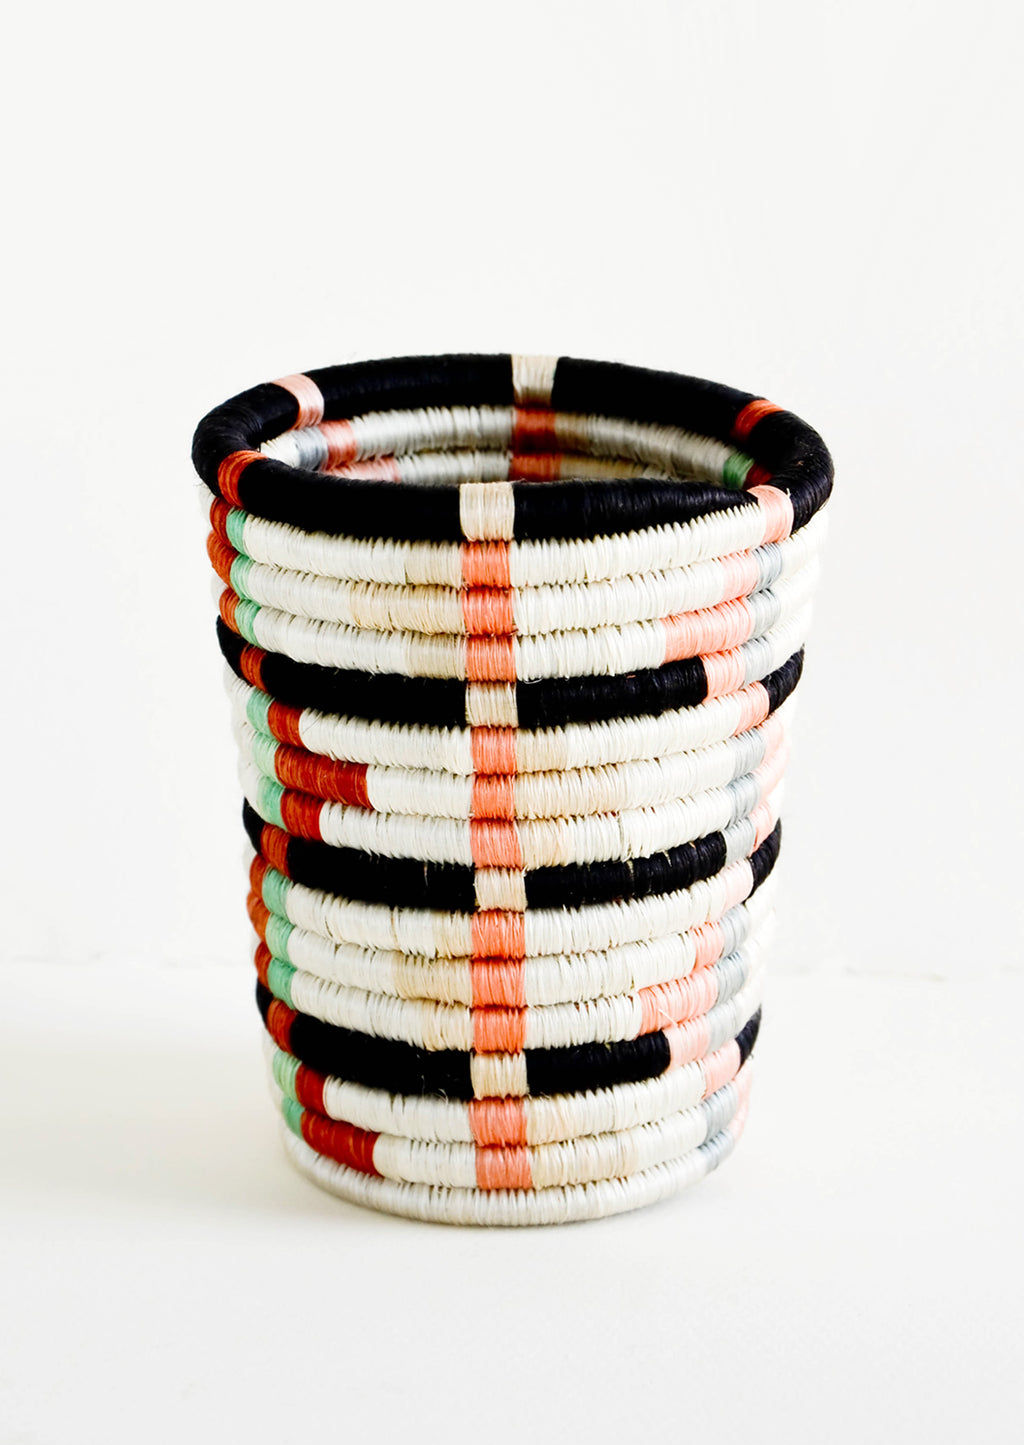 Peach Multi: Pencil cup shaped baskets woven from multicolor sweetgrass. Mix of pastel colors in a geometric pattern.